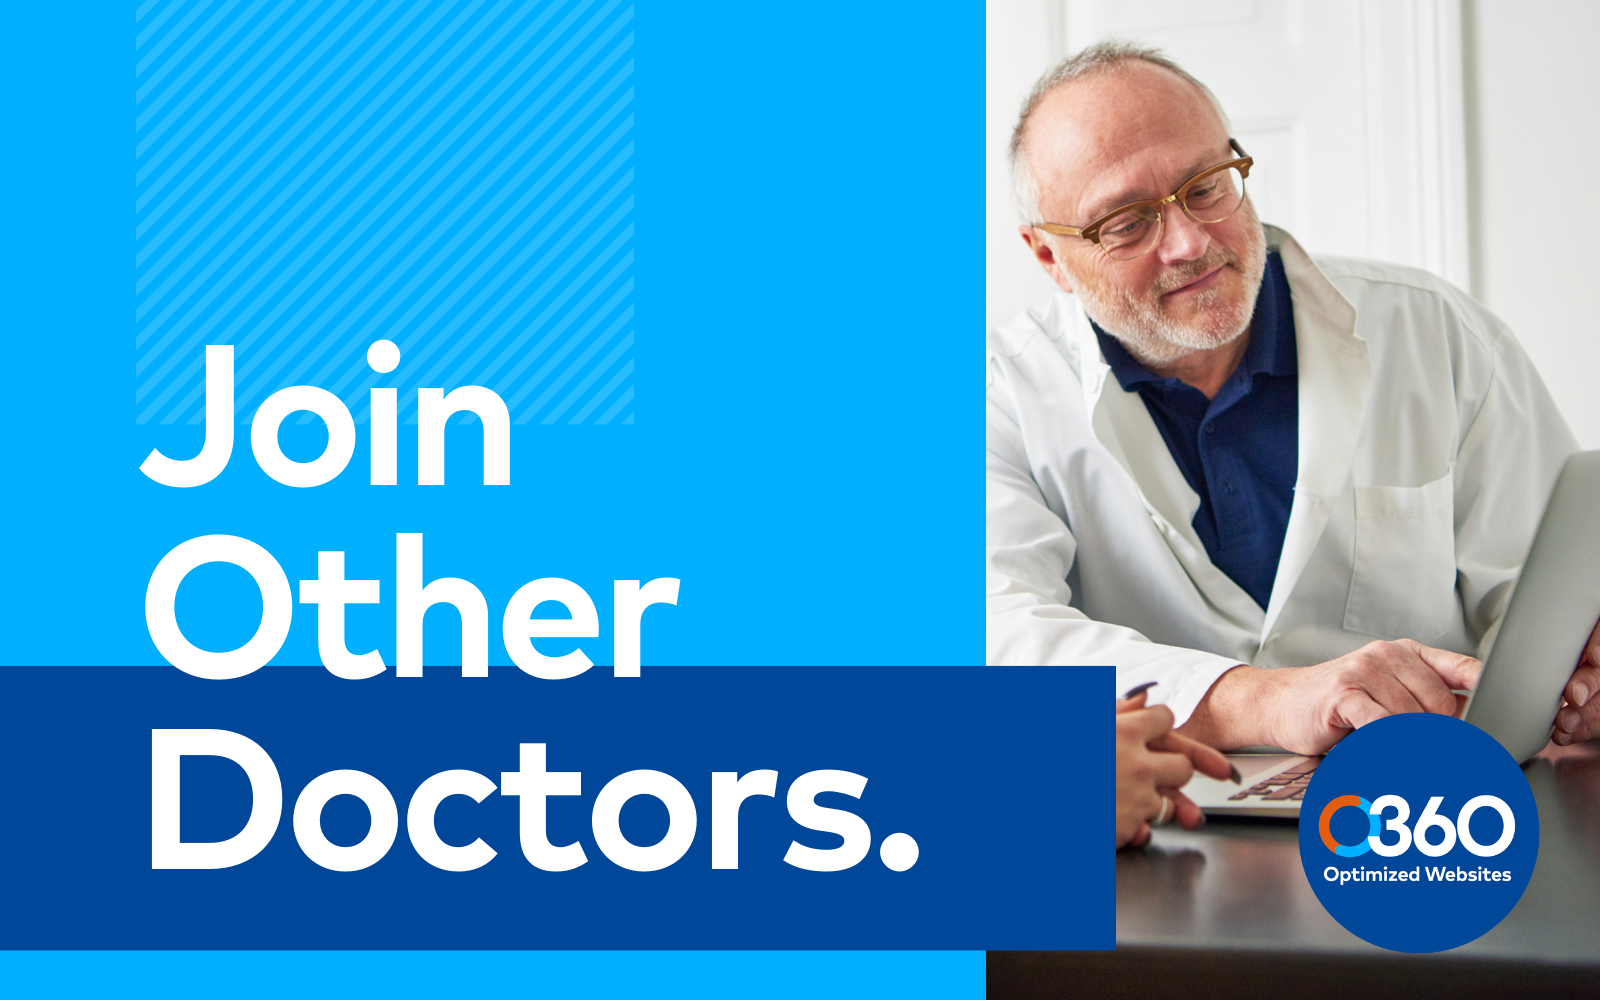 join other doctors with an image of one old doctor